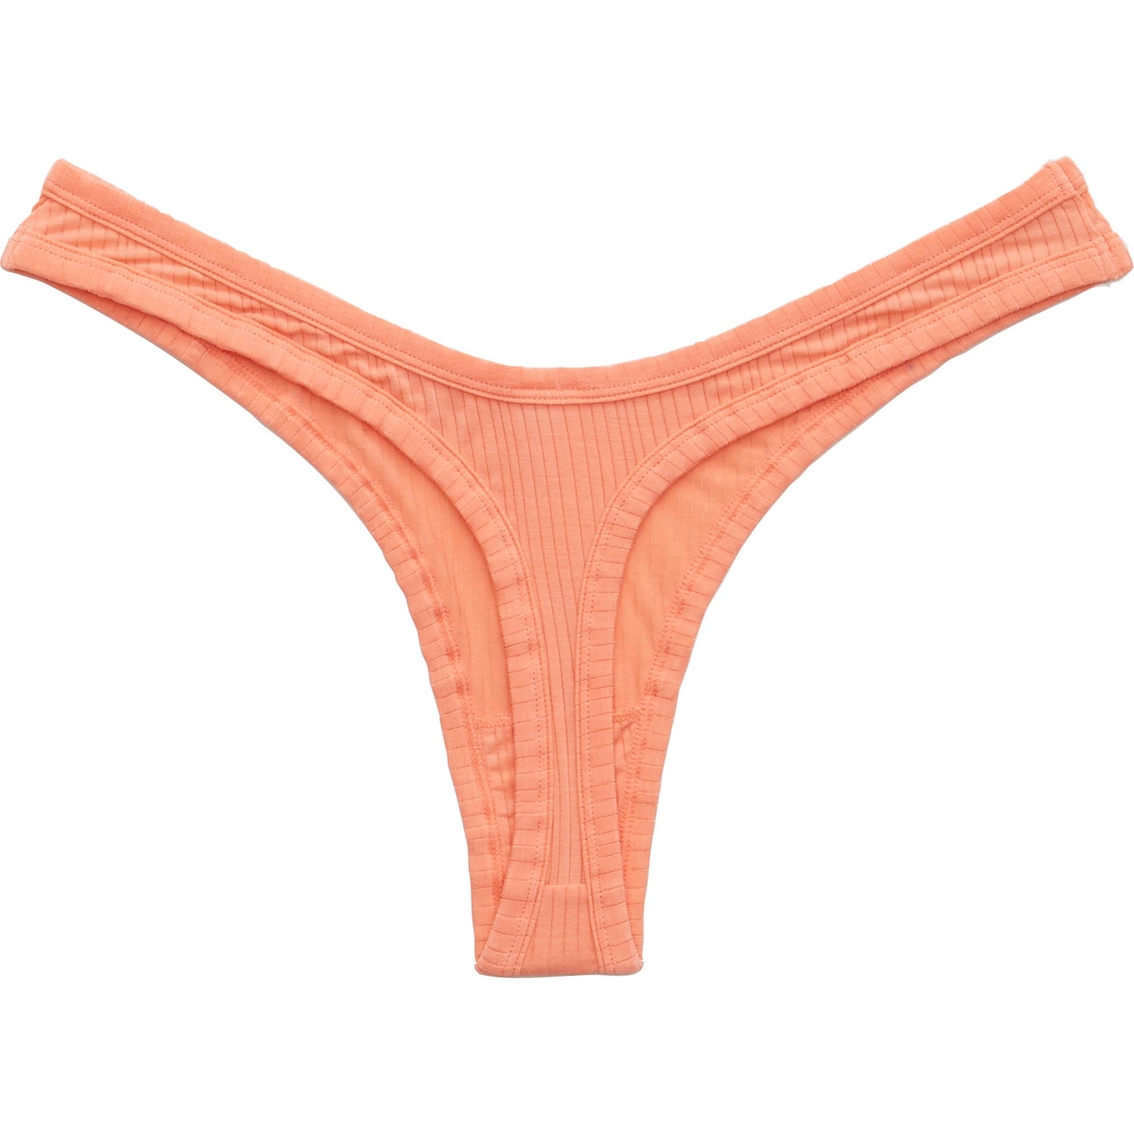 Aerie Modal Ribbed High Cut Thong Underwear - Image 2 of 2